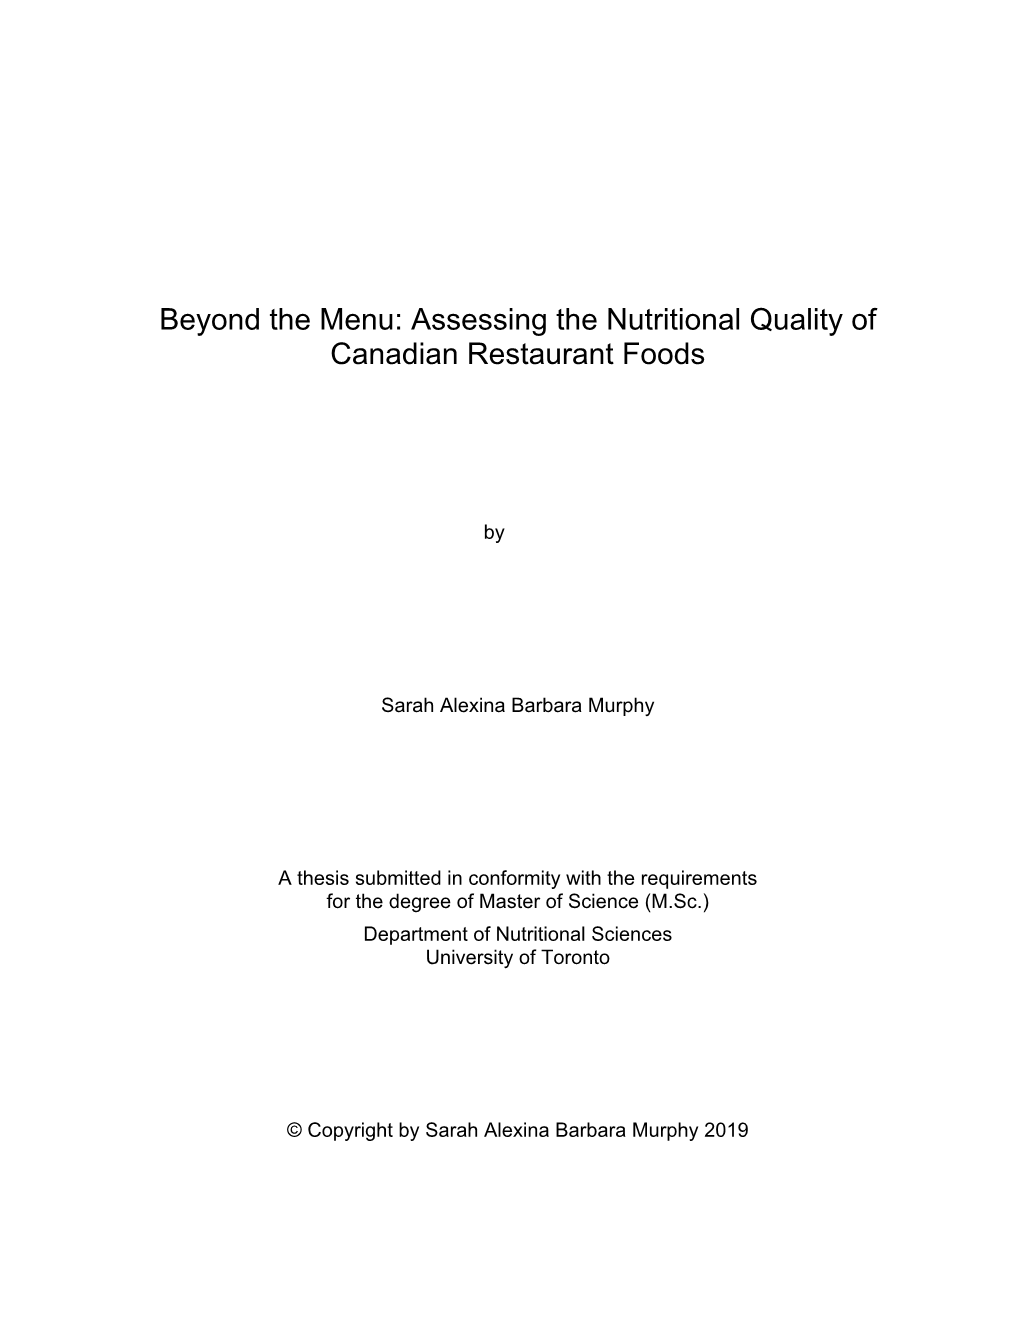 Assessing the Nutritional Quality of Canadian Restaurant Foods